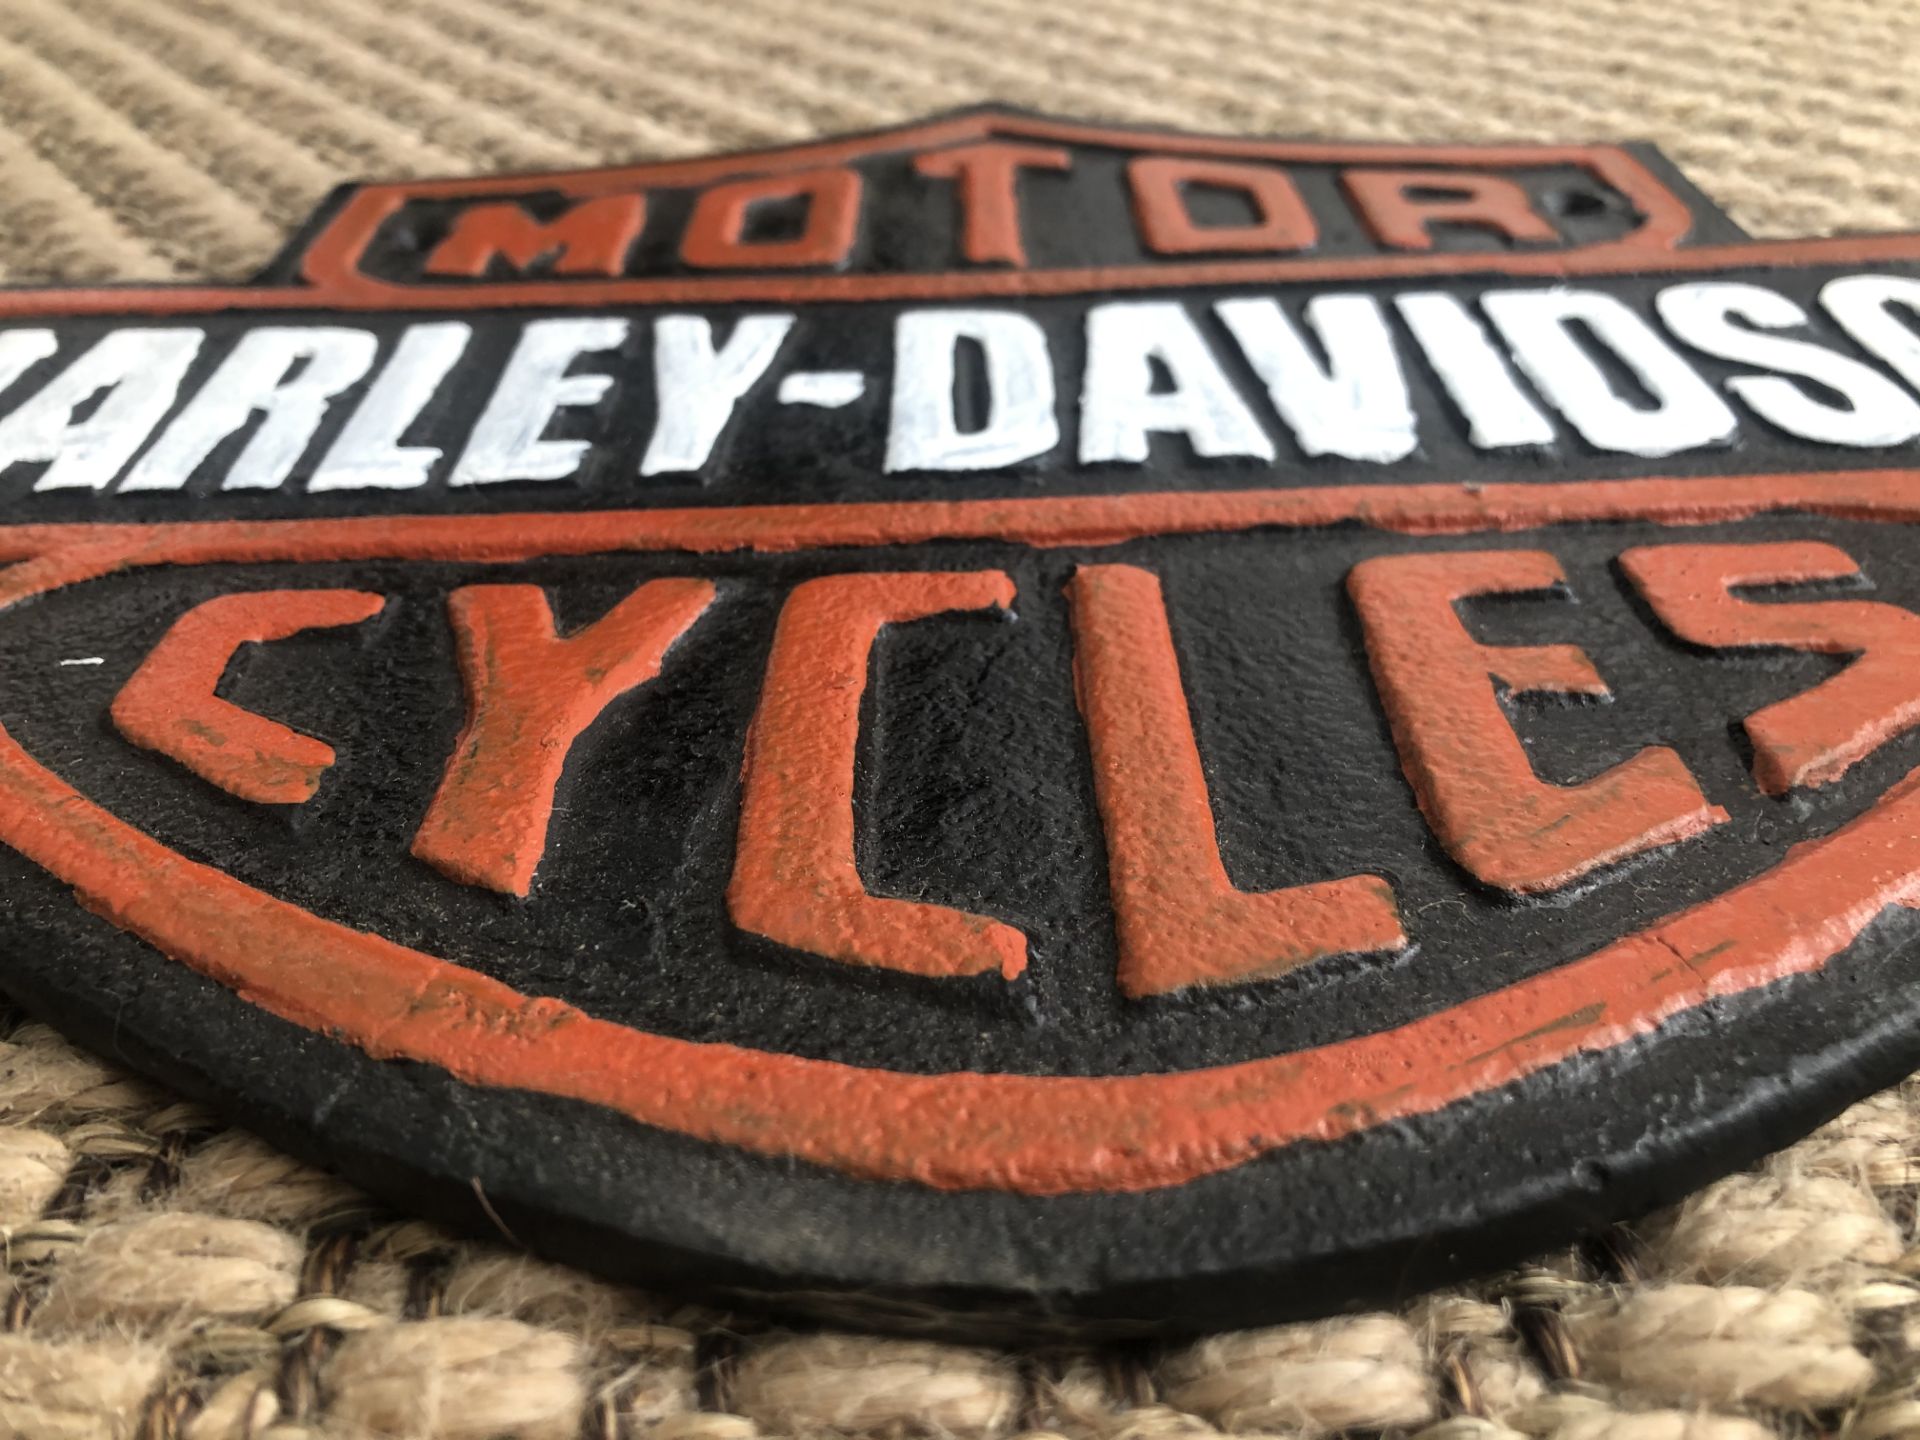 Cast Iron Harley Davidson Motorcycle Wall Plaque - Image 3 of 3